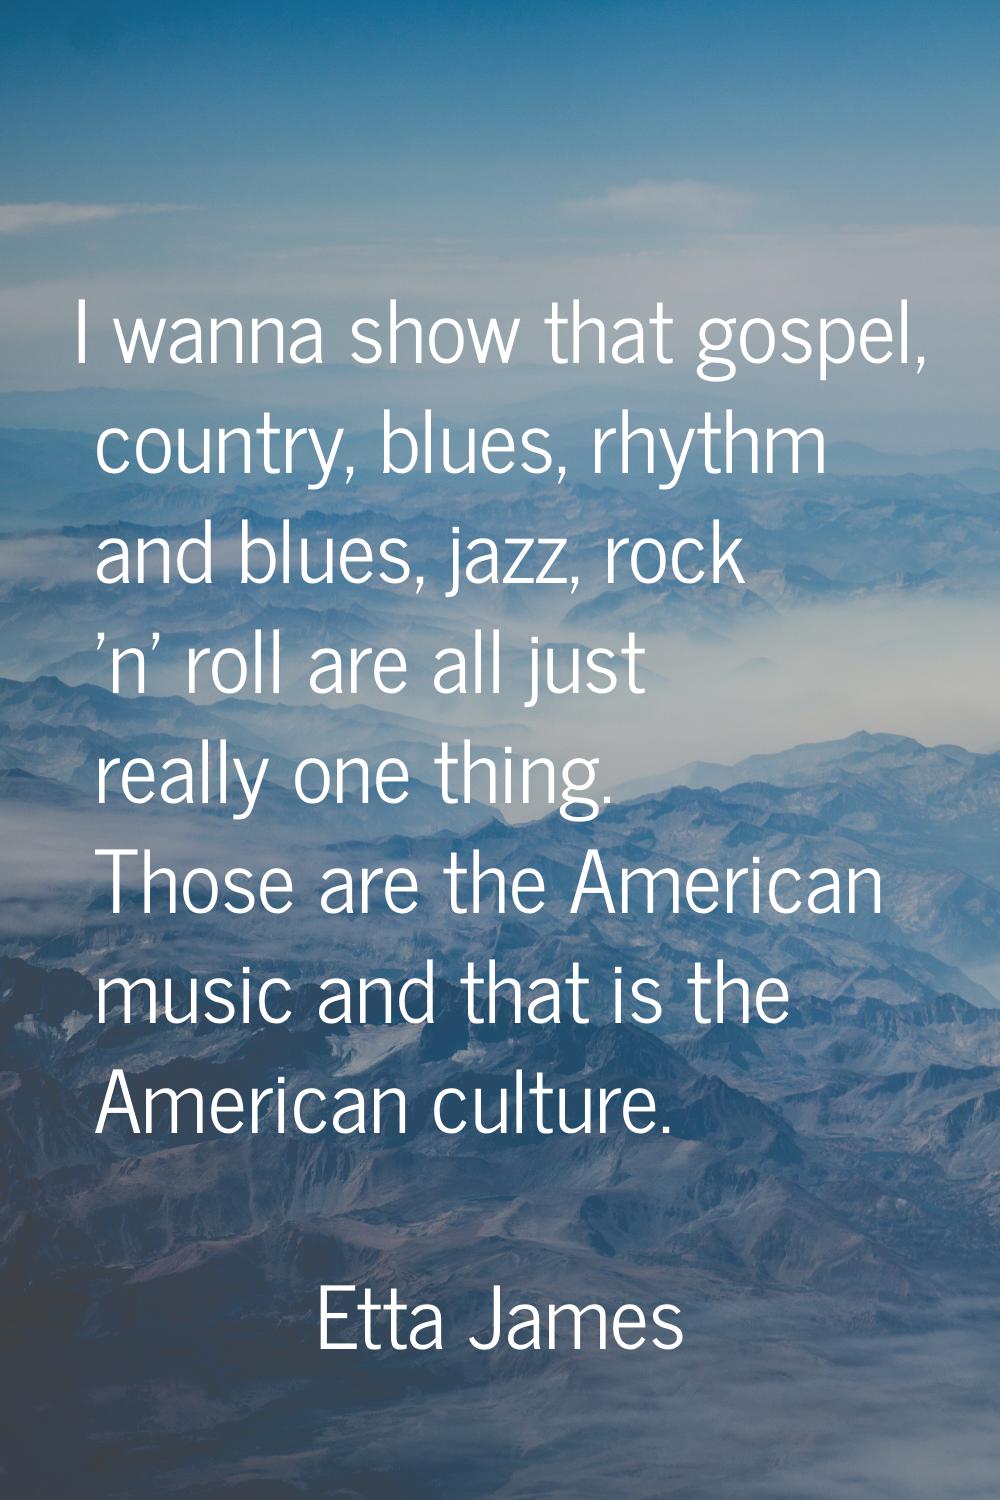 I wanna show that gospel, country, blues, rhythm and blues, jazz, rock 'n' roll are all just really